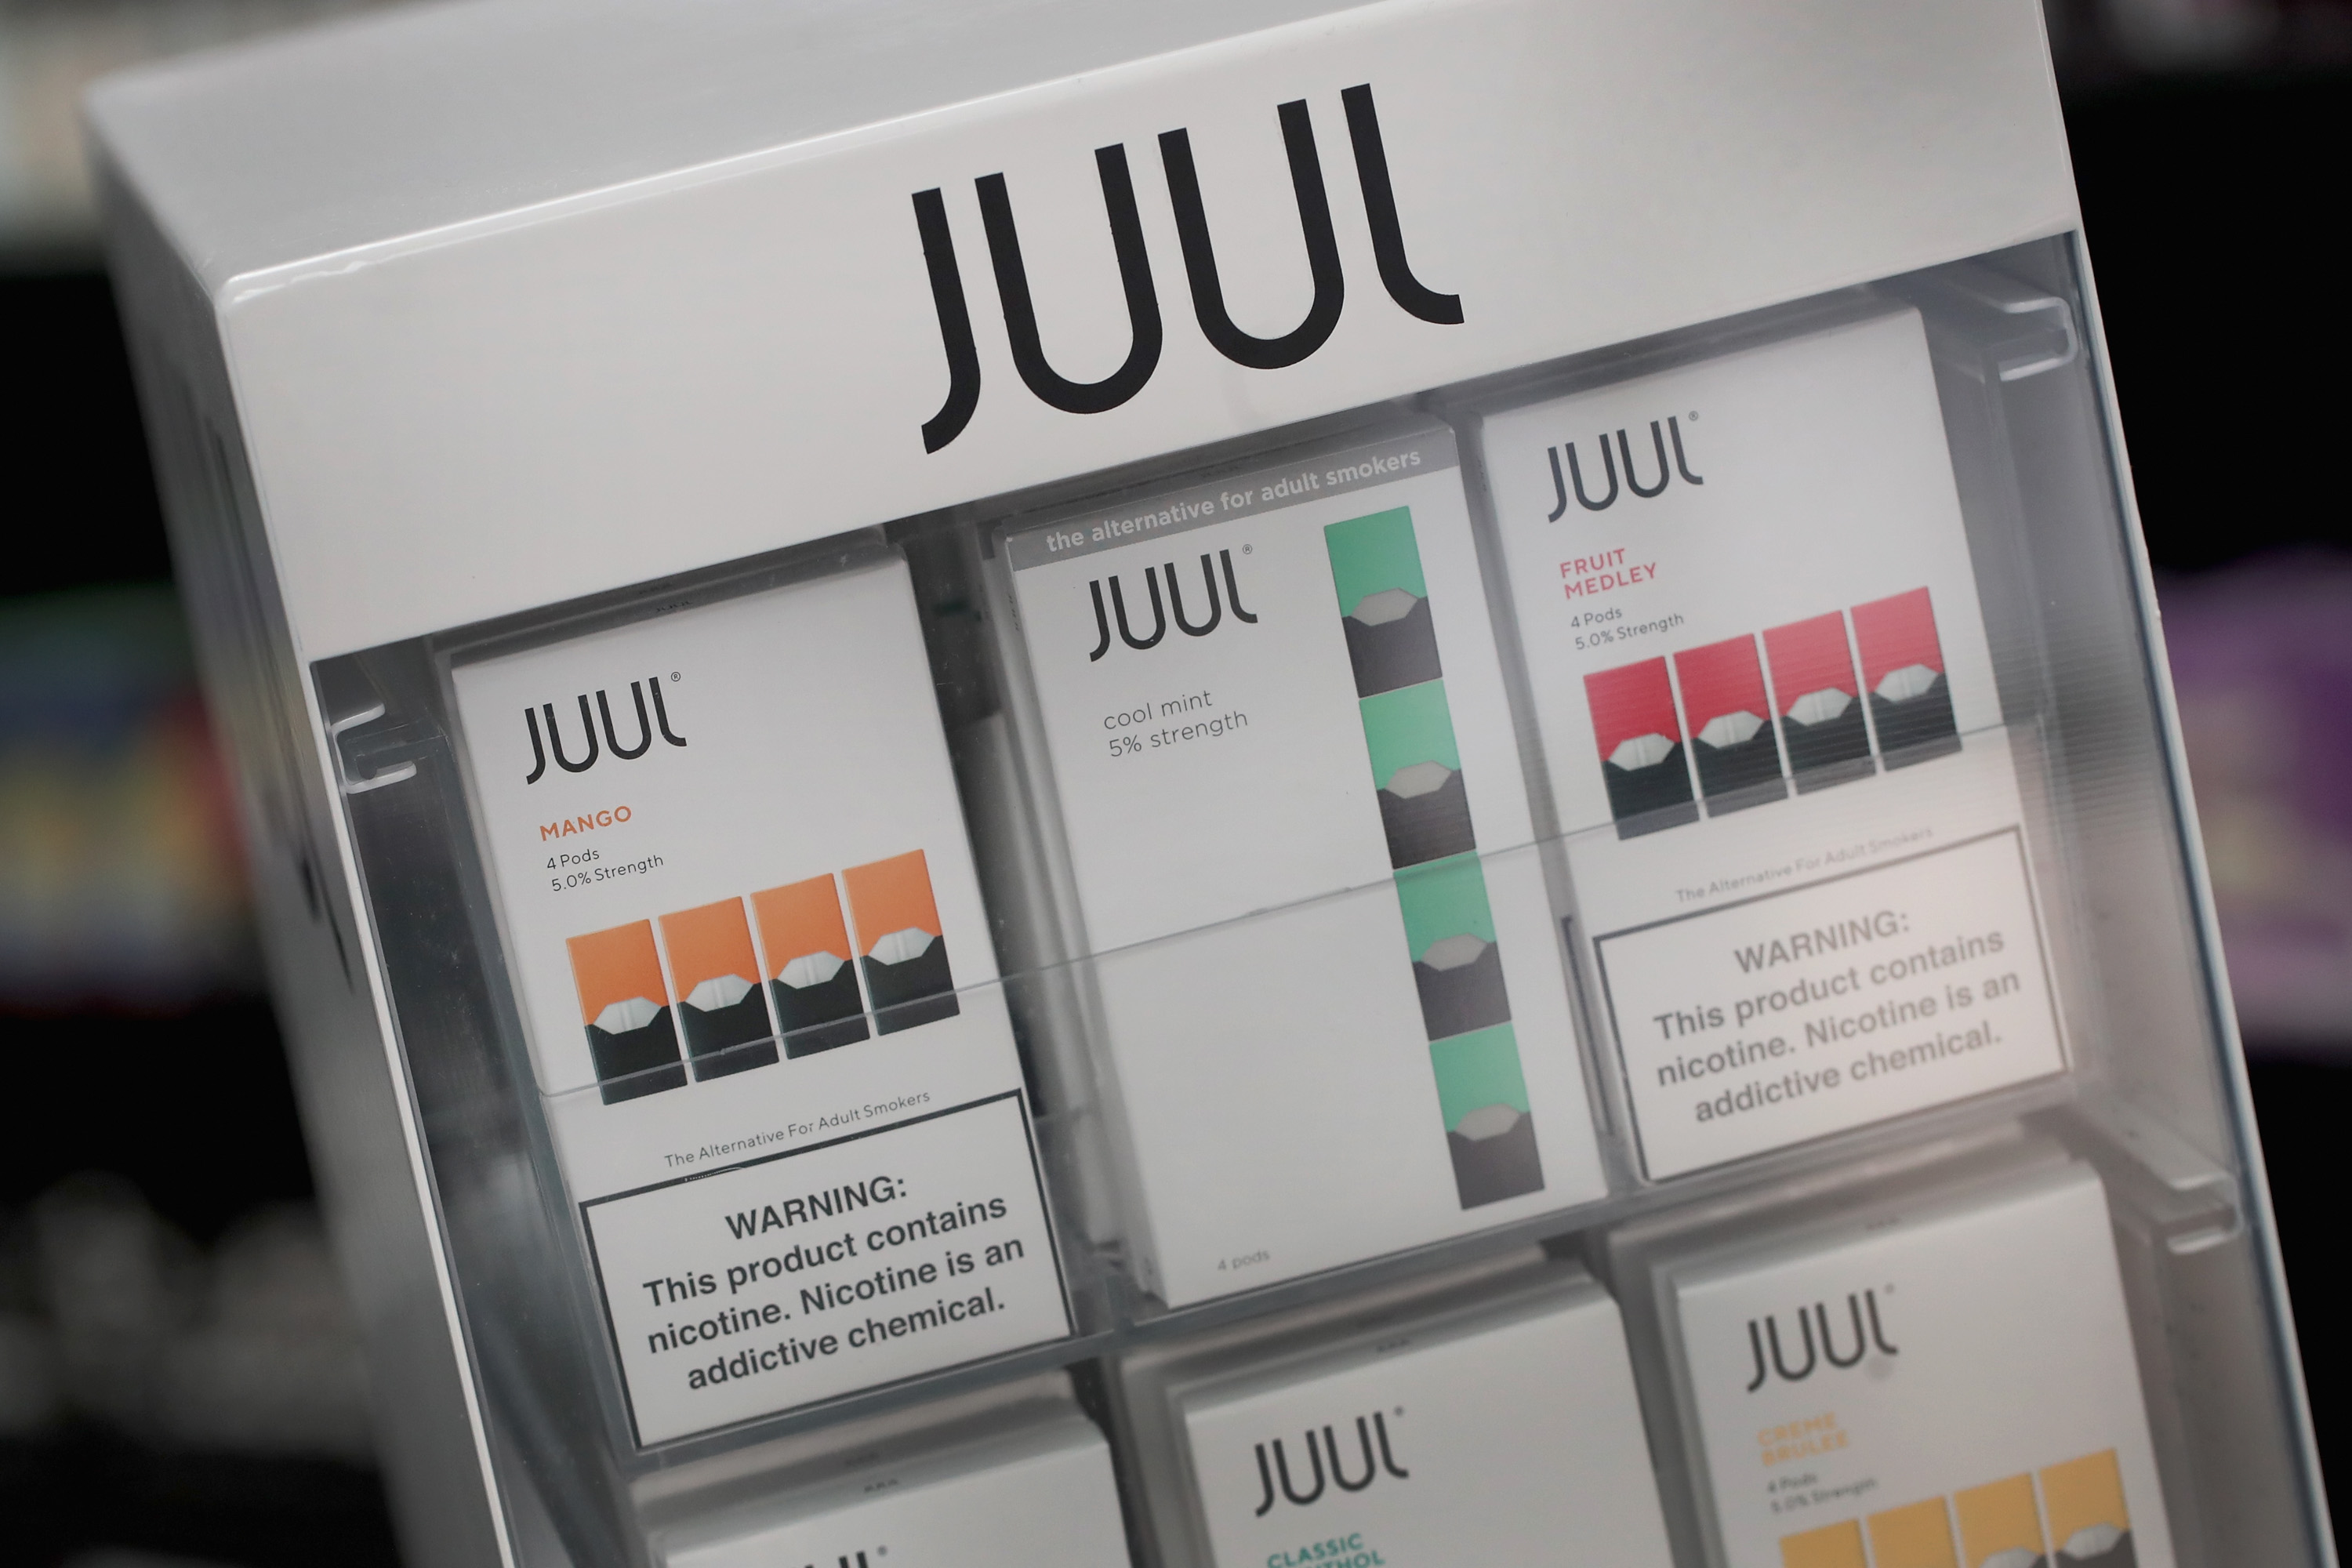 Juul pods for sale.